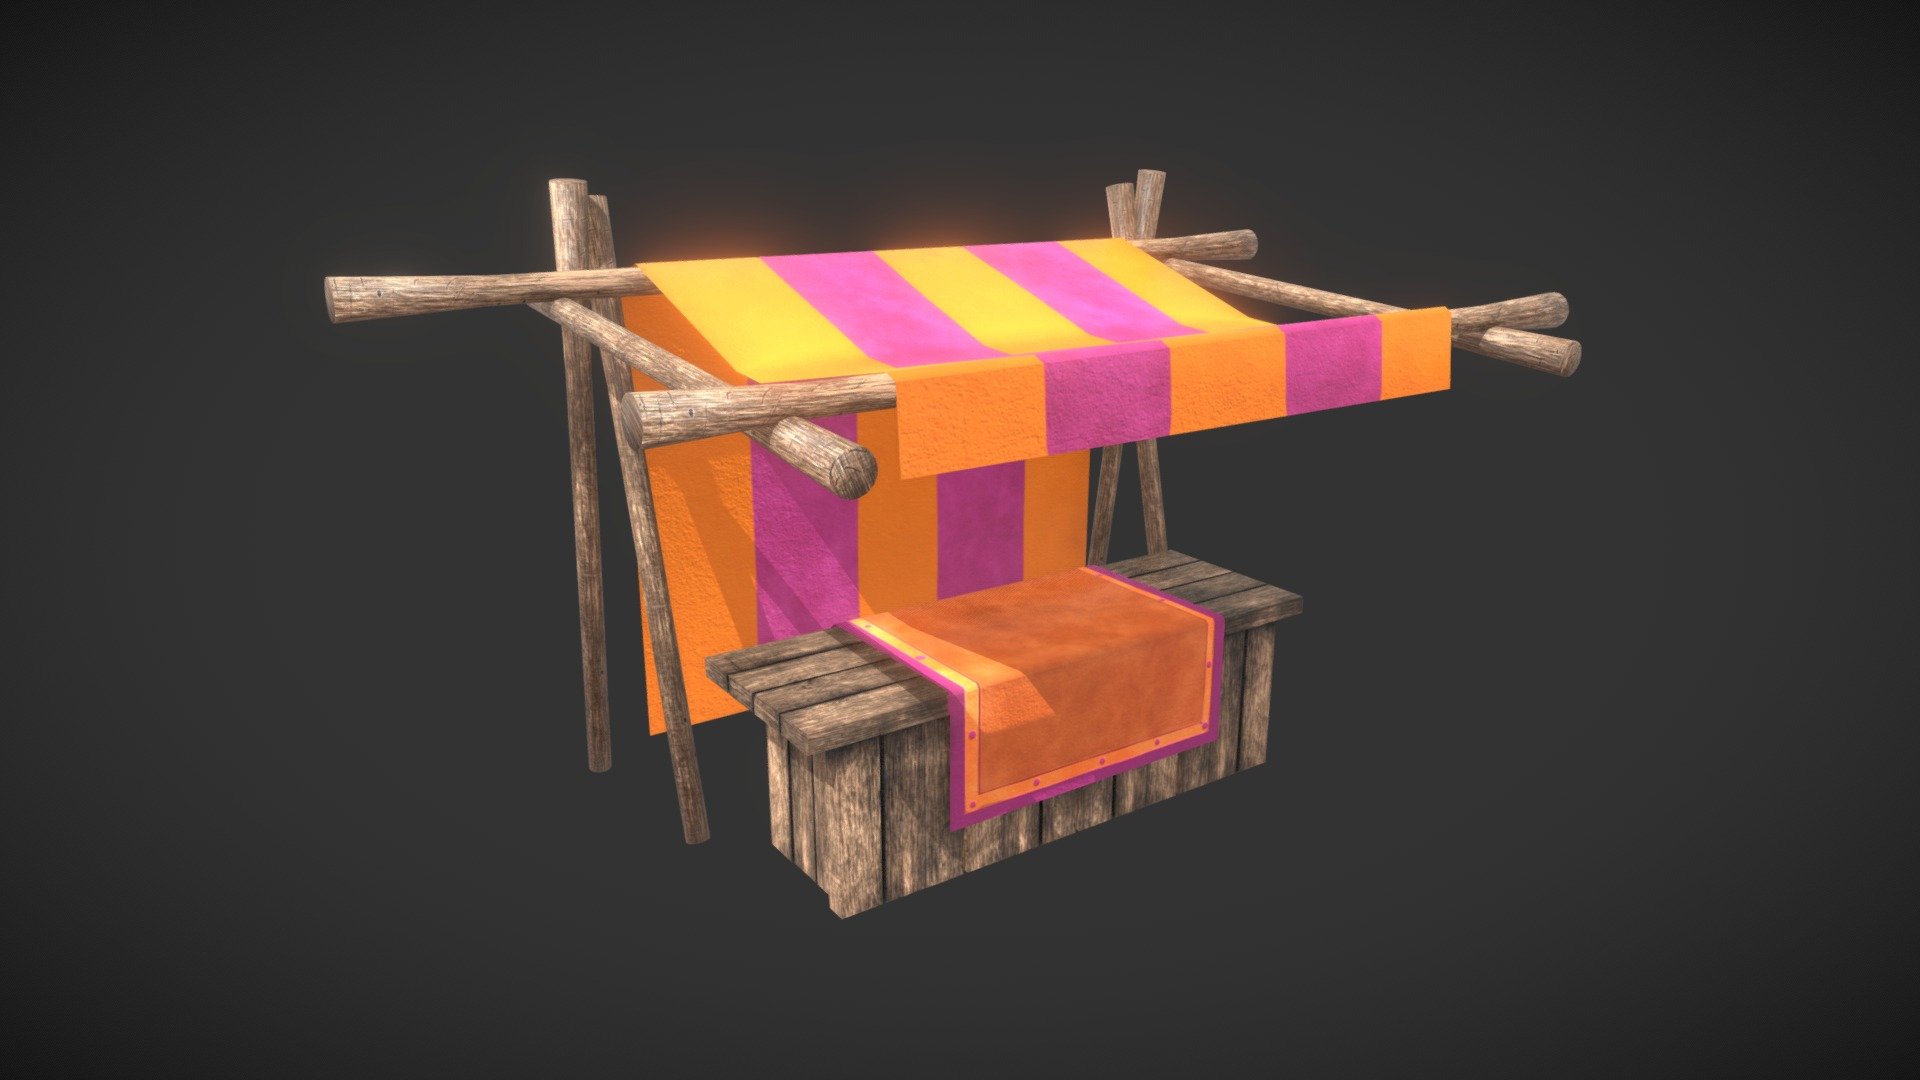 Hi! Thank you for using my model. I hope will serve you well in your game project.

This low-poly model is intended to be used for game engine, PC,mobile games or console with hand made texture. The model has been checked &amp; optimized for any game engine.

This Market model is based on Medieval market place  as inspiration. Textures are build base on Unity 5 - Standard Metallic with a resolution of 2048 x 2048 Px but you can use it on any 3D game engine that supports this workflow:
-Albedo -normal map -MetallicSmoothness

File Formats:
OBJ &amp; FBX

If you notice any issues, feel free to contact me and I will fix it right away. Thank you! - Medieval market - Buy Royalty Free 3D model by I.Sebastian.C 3d model